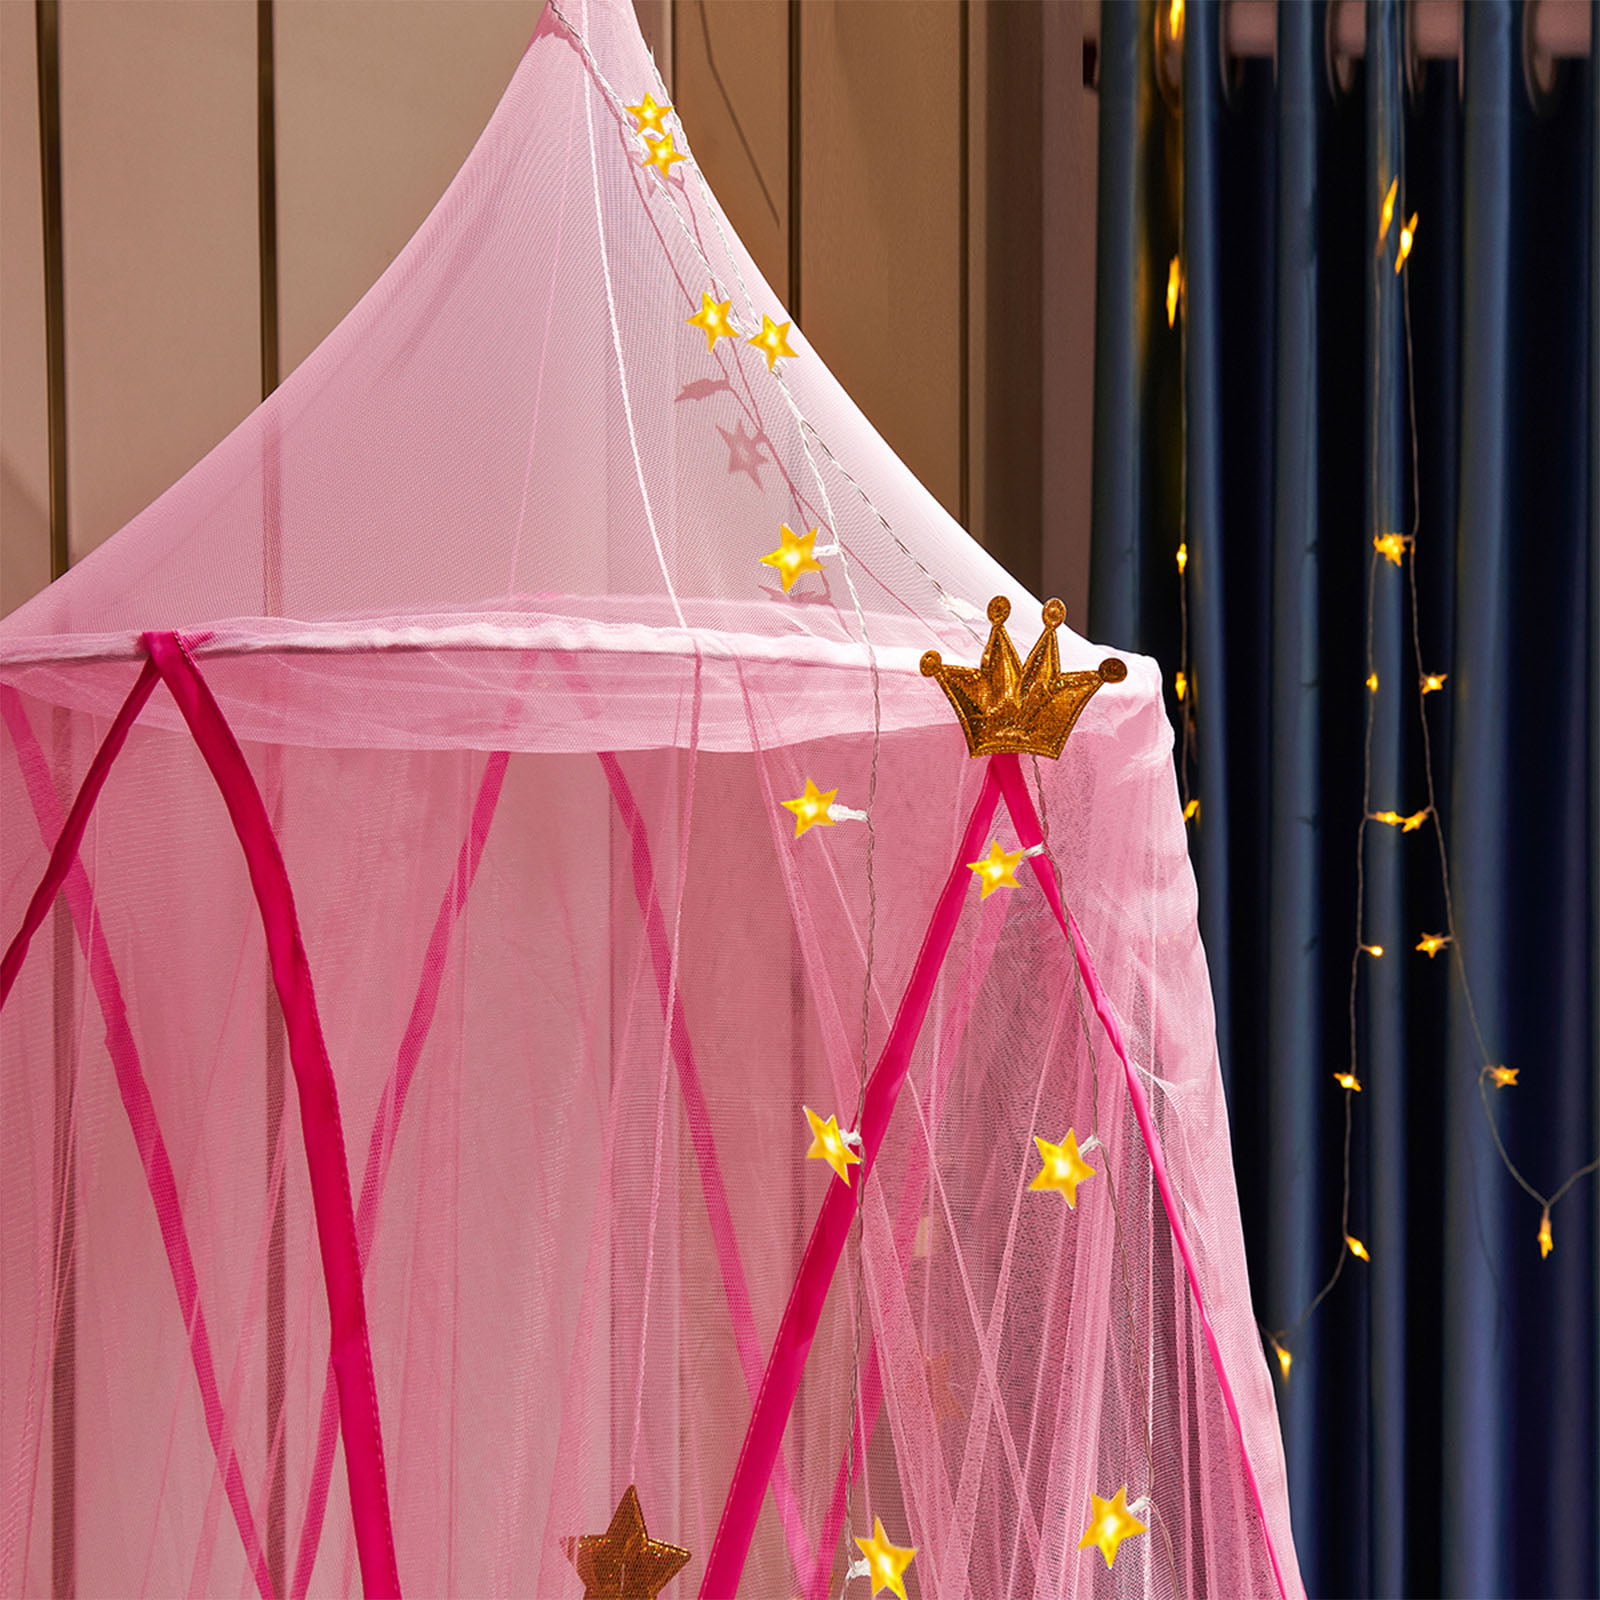 OldPAPA Bed Canopy Mosquito Net,Girls Boys Dome Princess Hanging